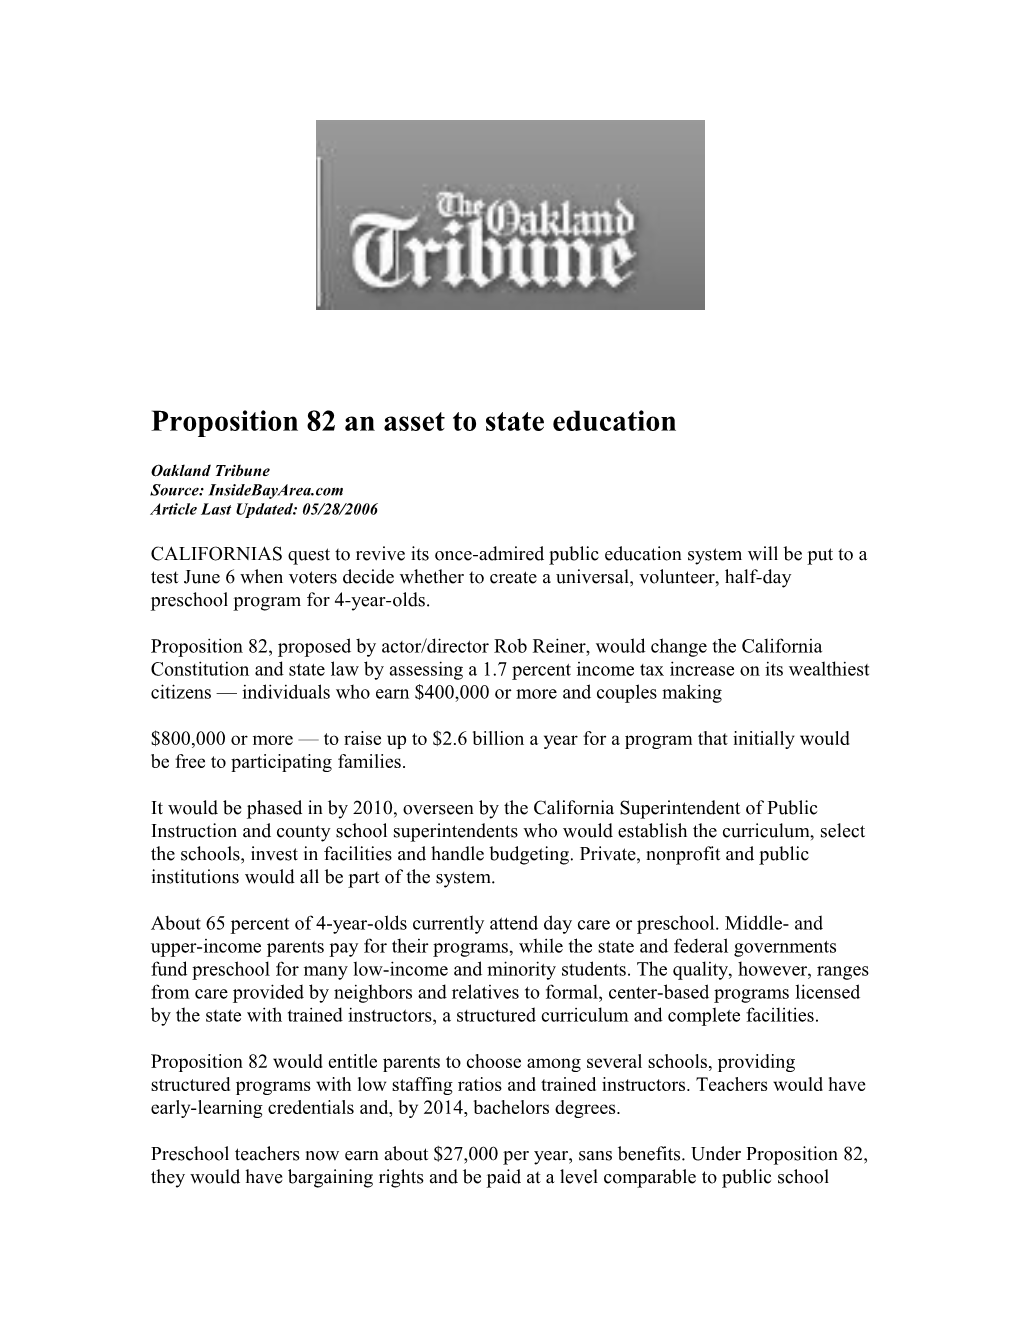 Proposition 82 an Asset to State Education